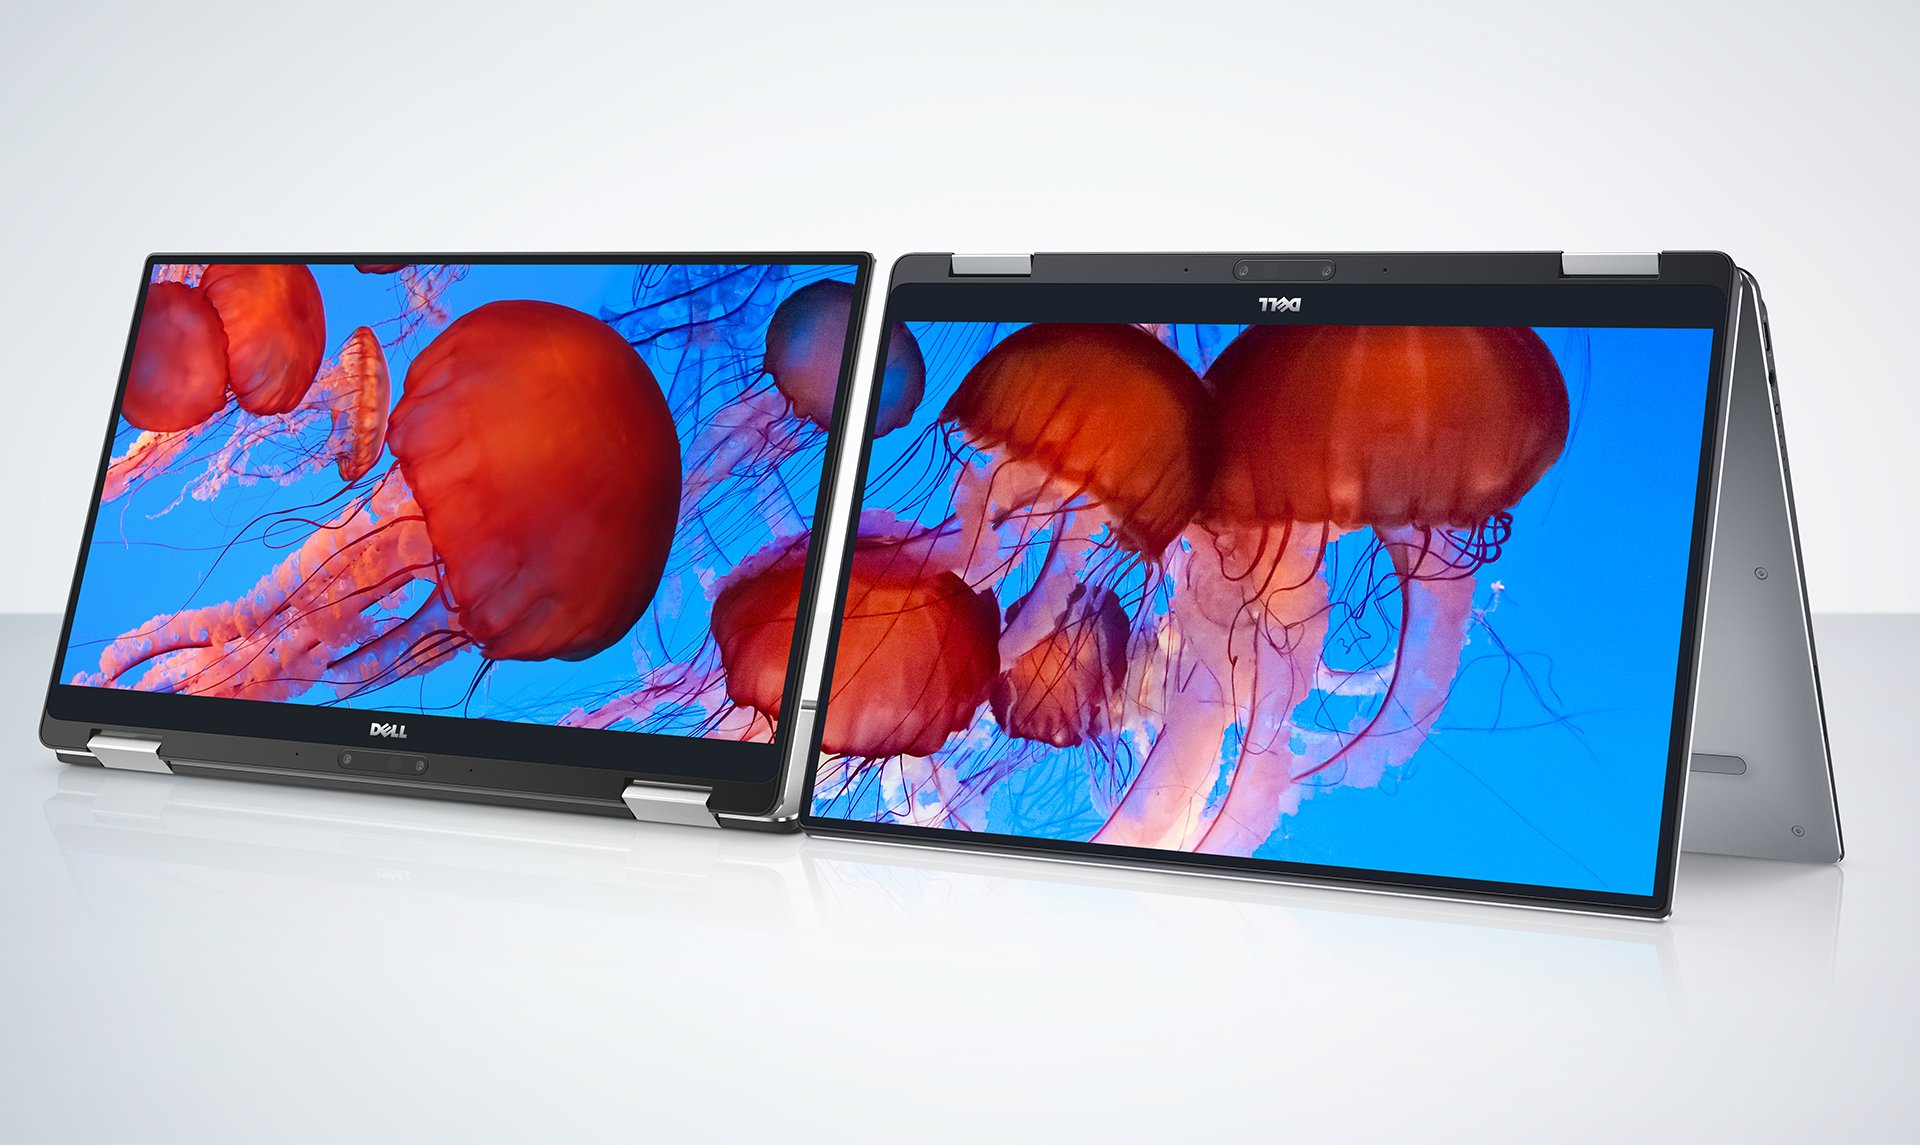 Dell XPS 13 finally comes in a 2-in-1 form factor but it isn’t priced in a friendly manner